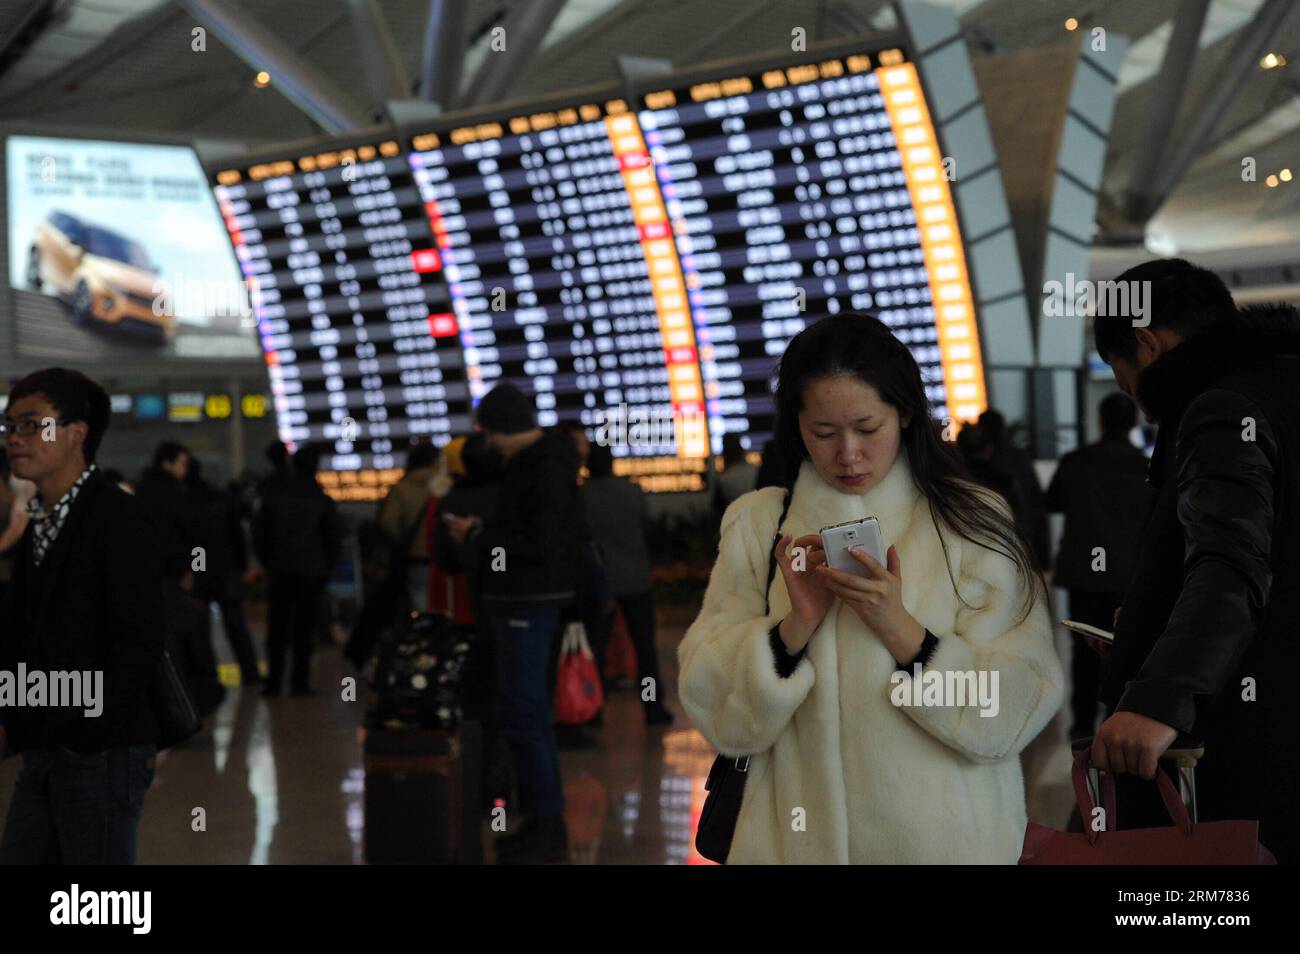 (140218) -- GUIYANG, Feb. 18, 2014 (Xinhua) -- Stranded passengers check on their flights information at Longdongbao International Airport in Guiyang, capital of southwest China s Guizhou Province, Feb. 18, 2013. Heavy snow led to temporary closure of the airport at 8 a.m. Tuesday for snow and ice removal. More than 90 flights were canceled and over 4,800 passengers were affected before the airport was reopened at noon. (Xinhua/Tao Liang)(wjq) CHINA-GUIZHOU-SNOW-AIRPORT CLOSURE (CN) PUBLICATIONxNOTxINxCHN   Guiyang Feb 18 2014 XINHUA stranded Passengers Check ON their Flights Information AT Lo Stock Photo